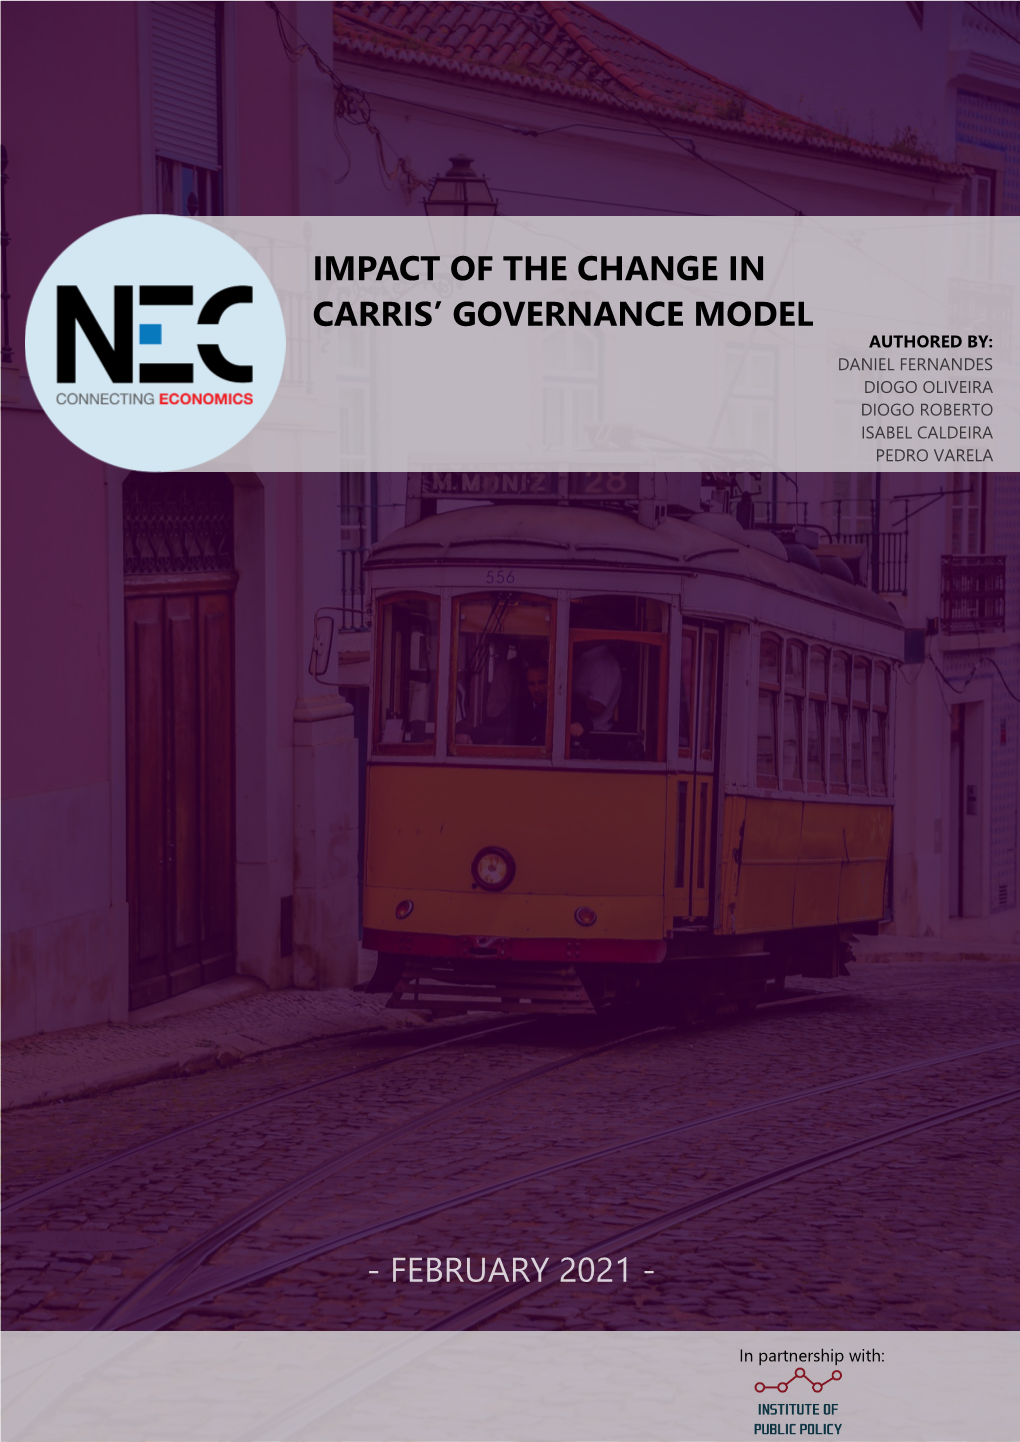 Impact of the Change in Carris' Governance Model